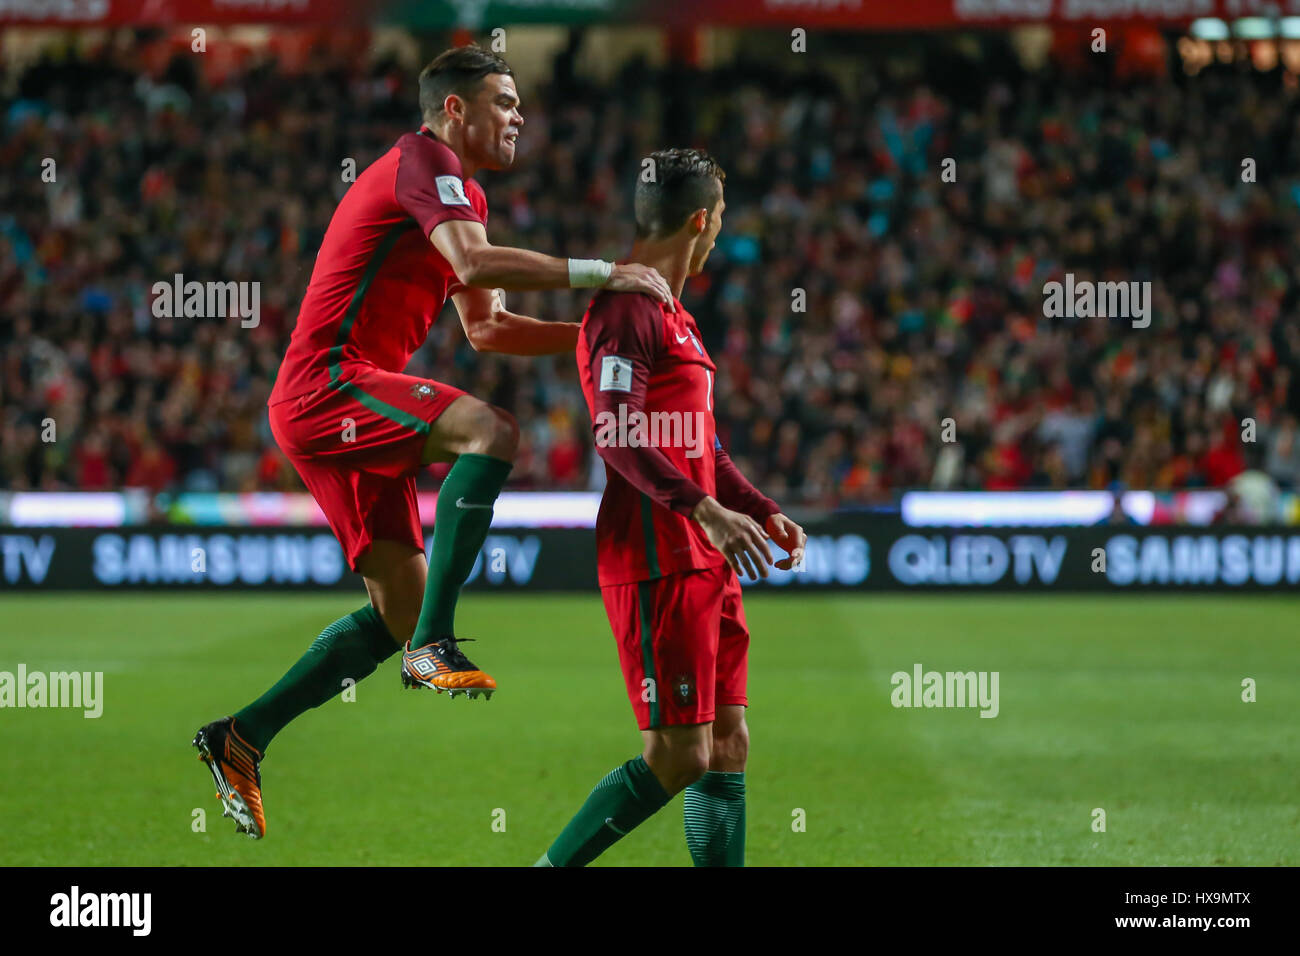 March 25, 2017. Lisbon, Portugal. Portugal's forward Cristiano Ronaldo (7) celebrating after scoring a goal with Portugal's defender Pepe (3) during the FIFA 2018 World Cup Qualifier between Portugal v Hungary Credit: Alexandre de Sousa/Alamy Live News Stock Photo